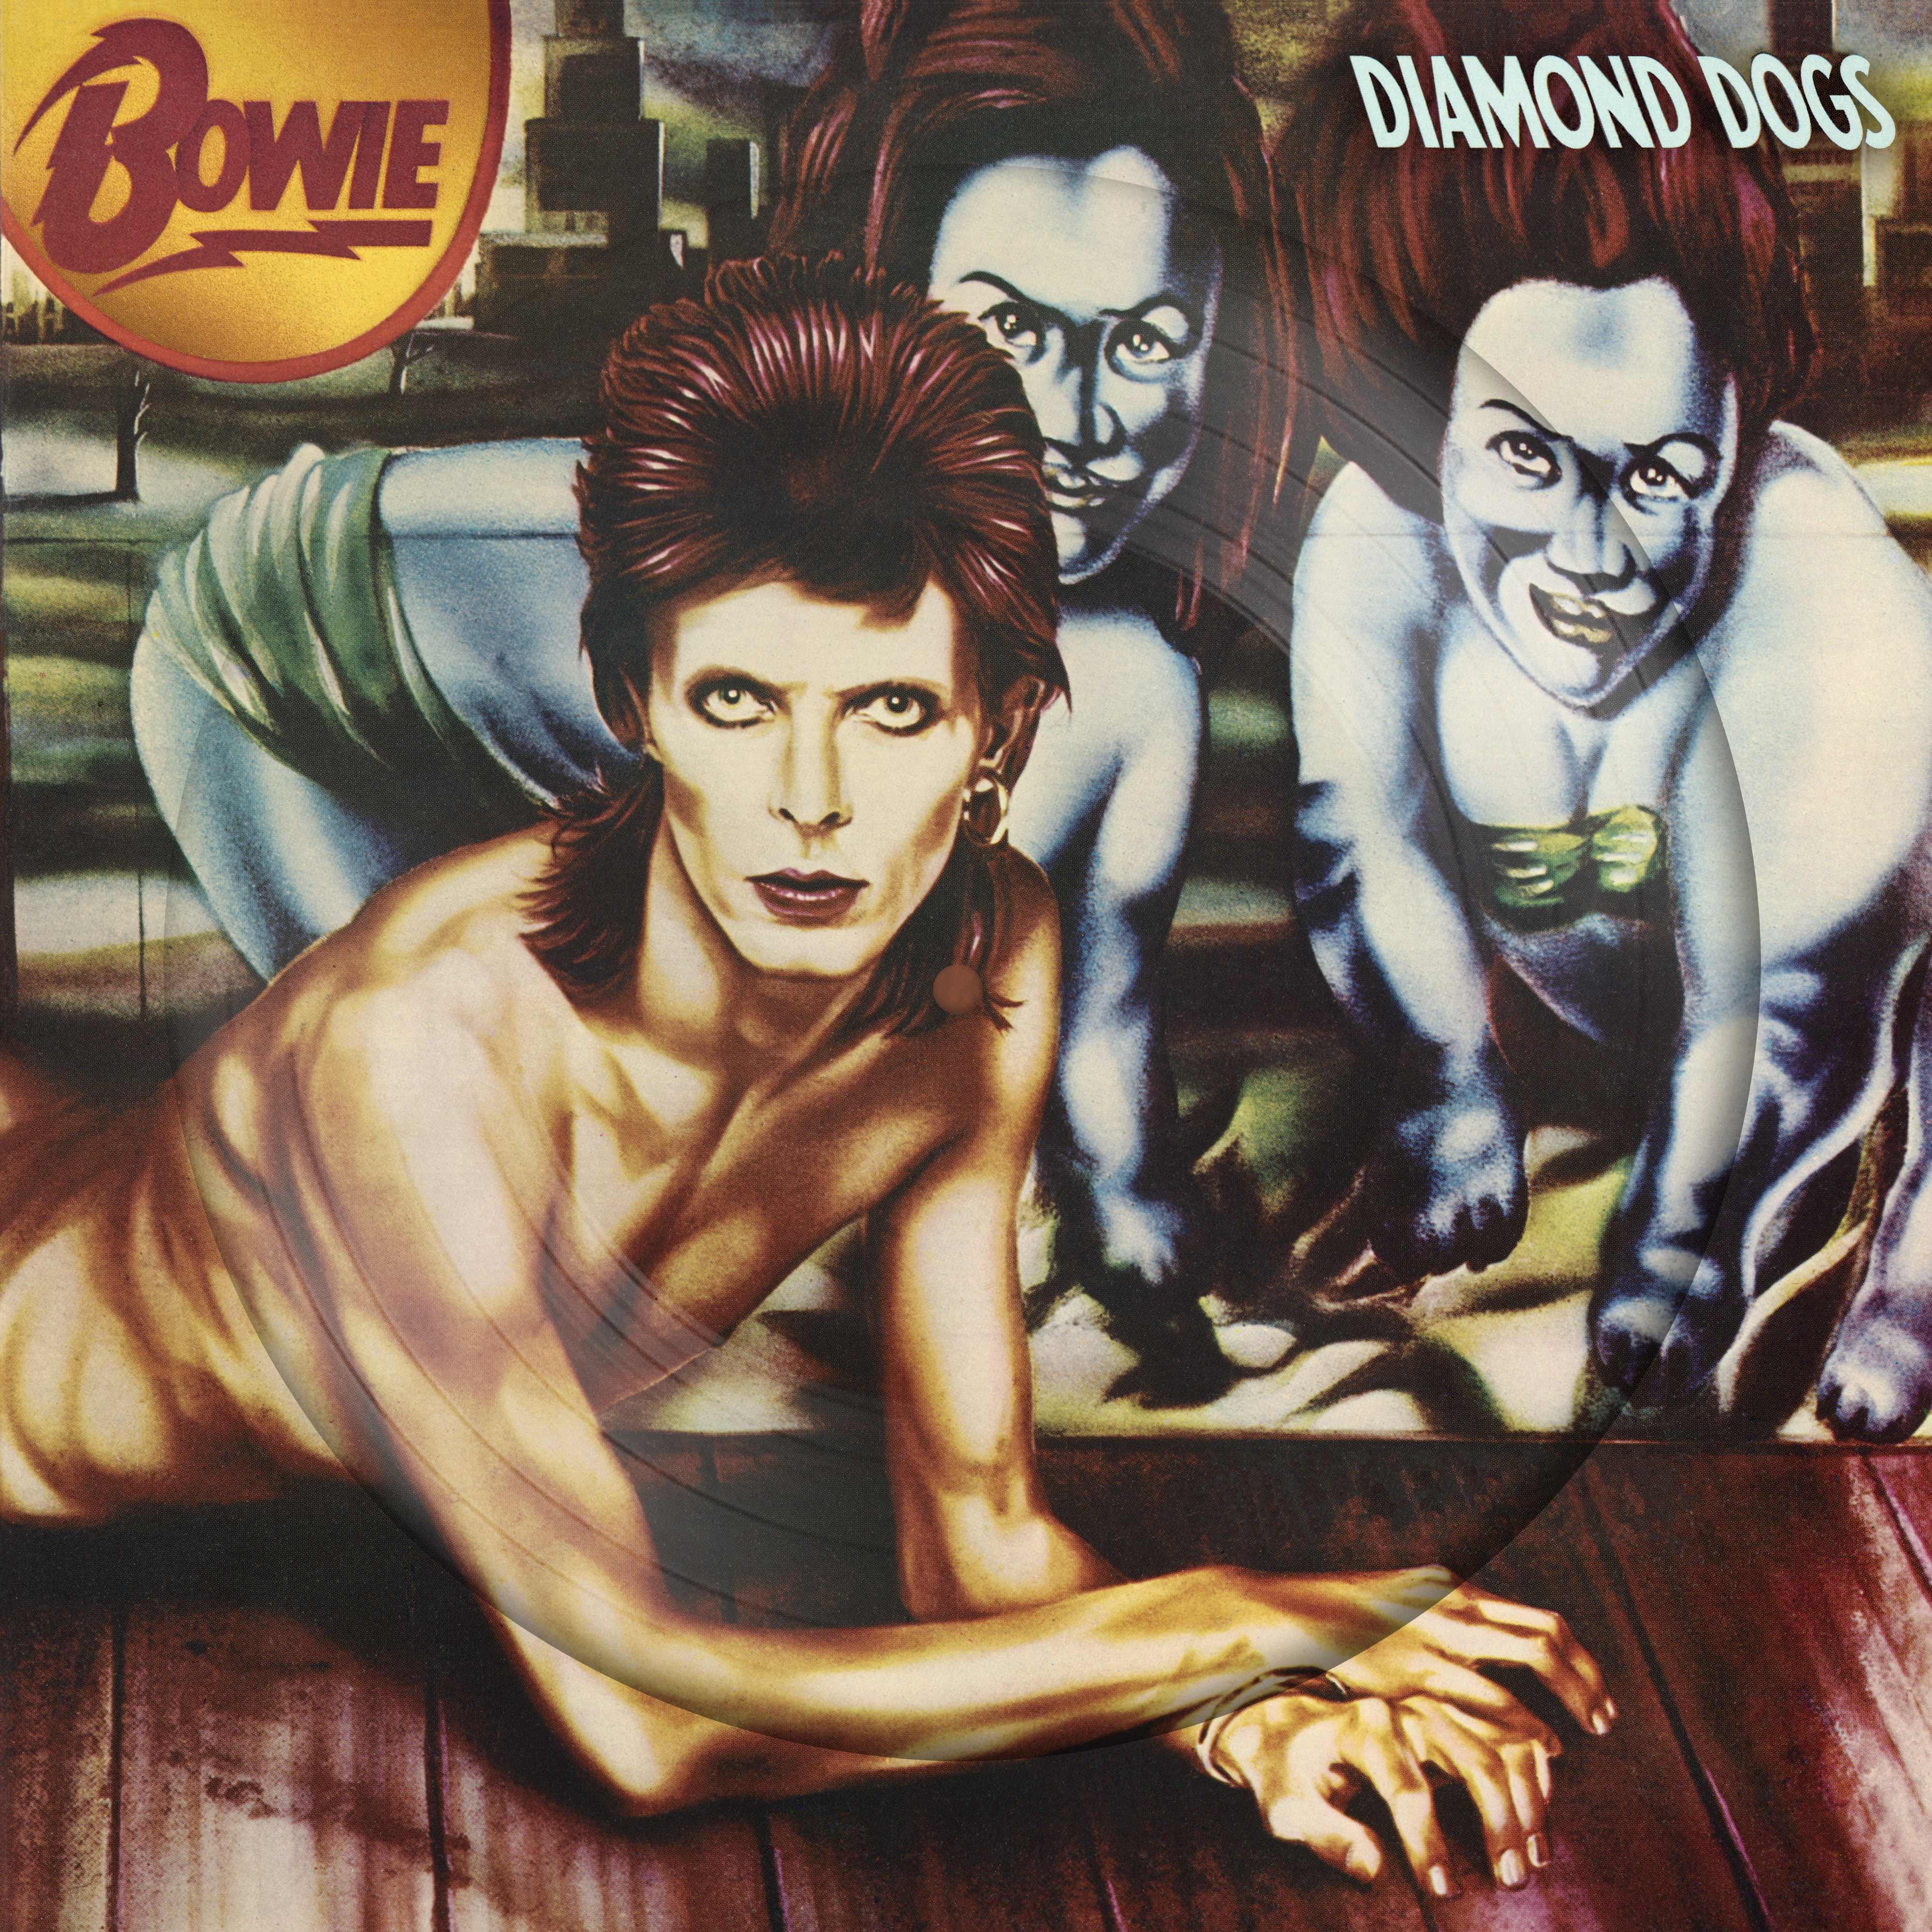 David Bowie - Diamond Dogs (50th Anniversary): Limited Picture Disc Vinyl LP